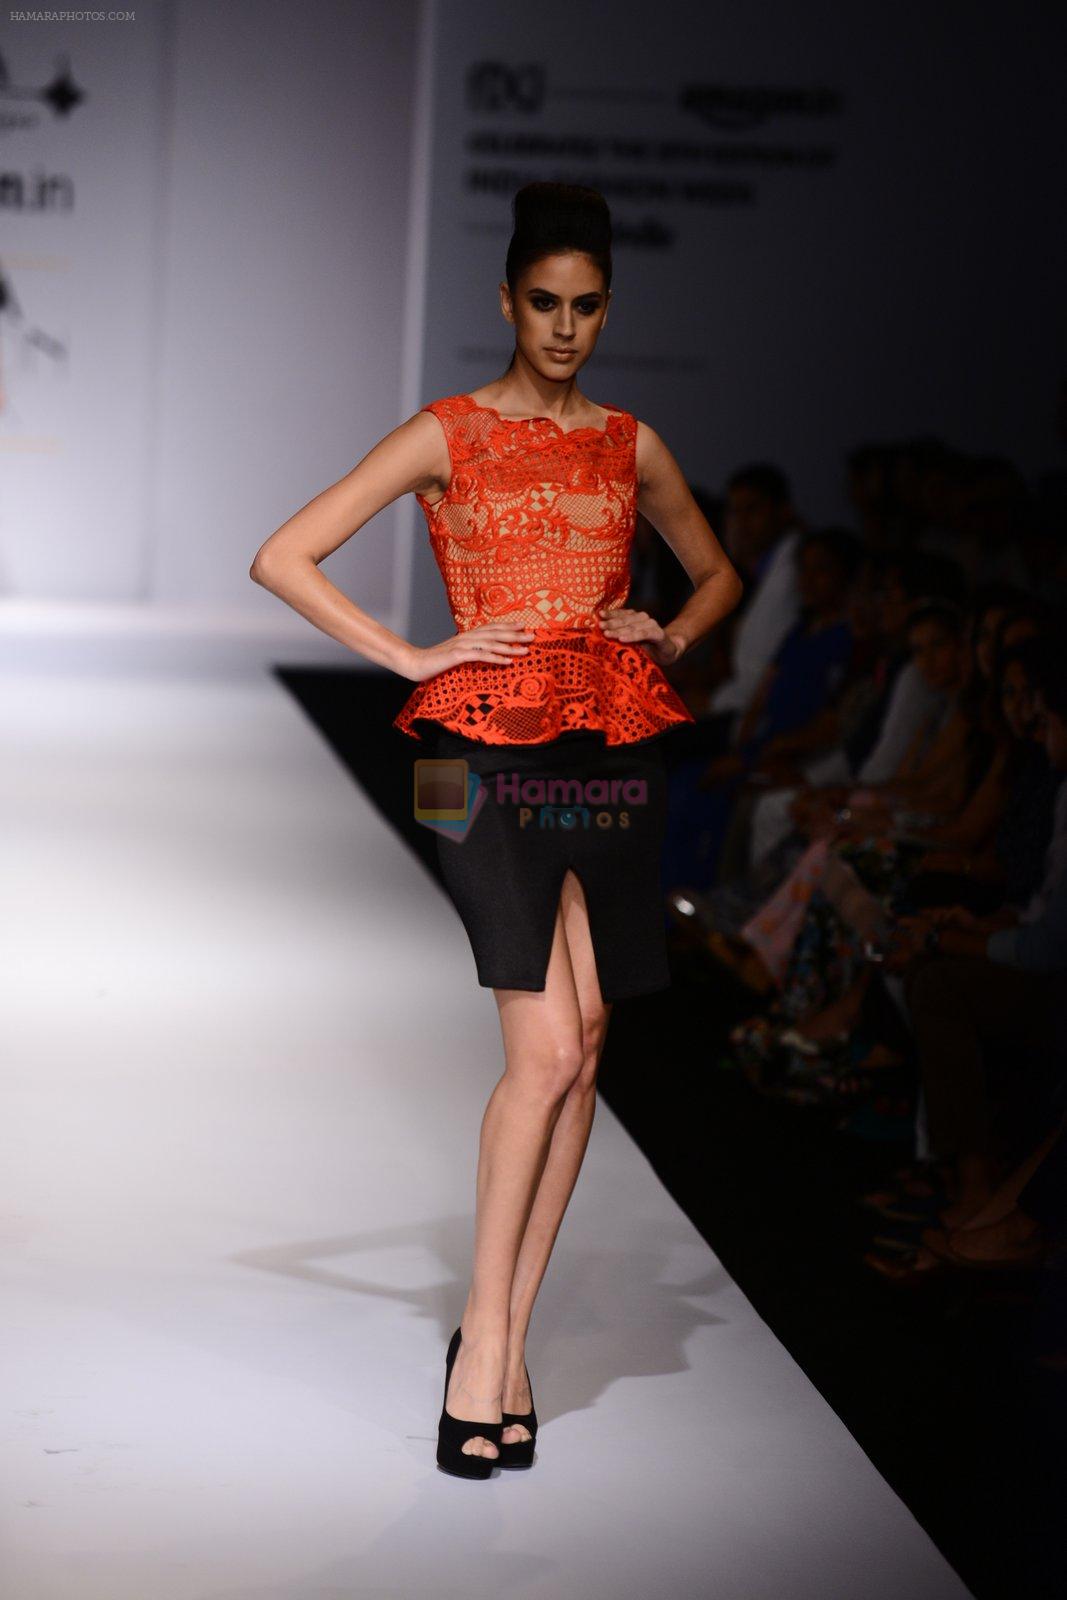 Model walk the ramp for Nikhita on day 4 of Amazon India Fashion Week on 28th March 2015